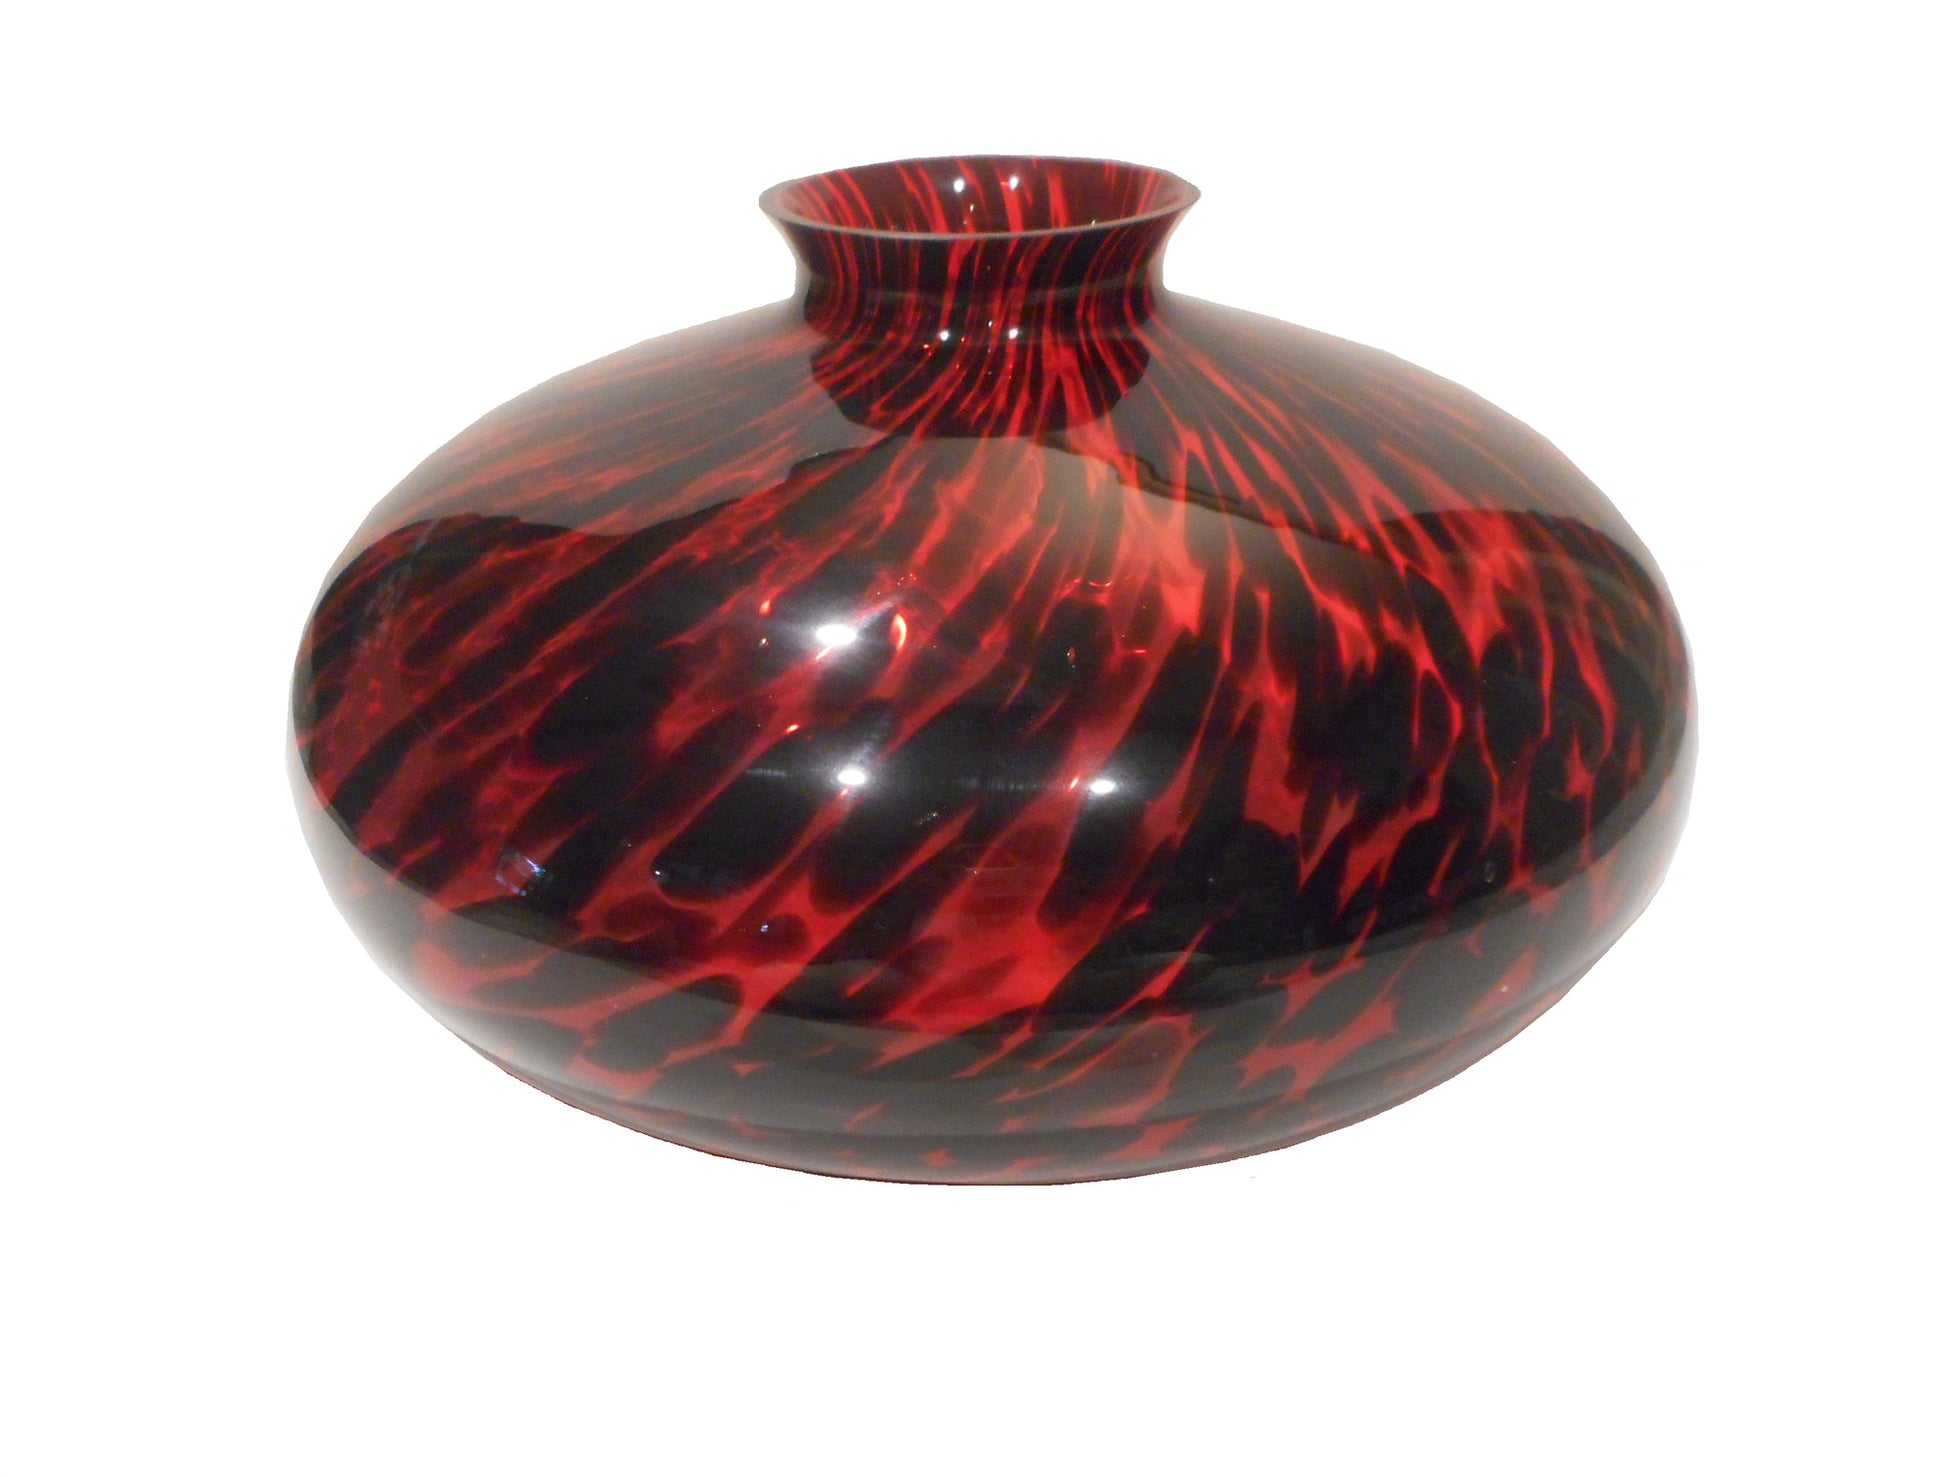 15.5 x 9.5 inches glass vase.  Large statement piece.  Wider than it is tall.  Red glass with black swirls resembling a leopard print. Made in Poland